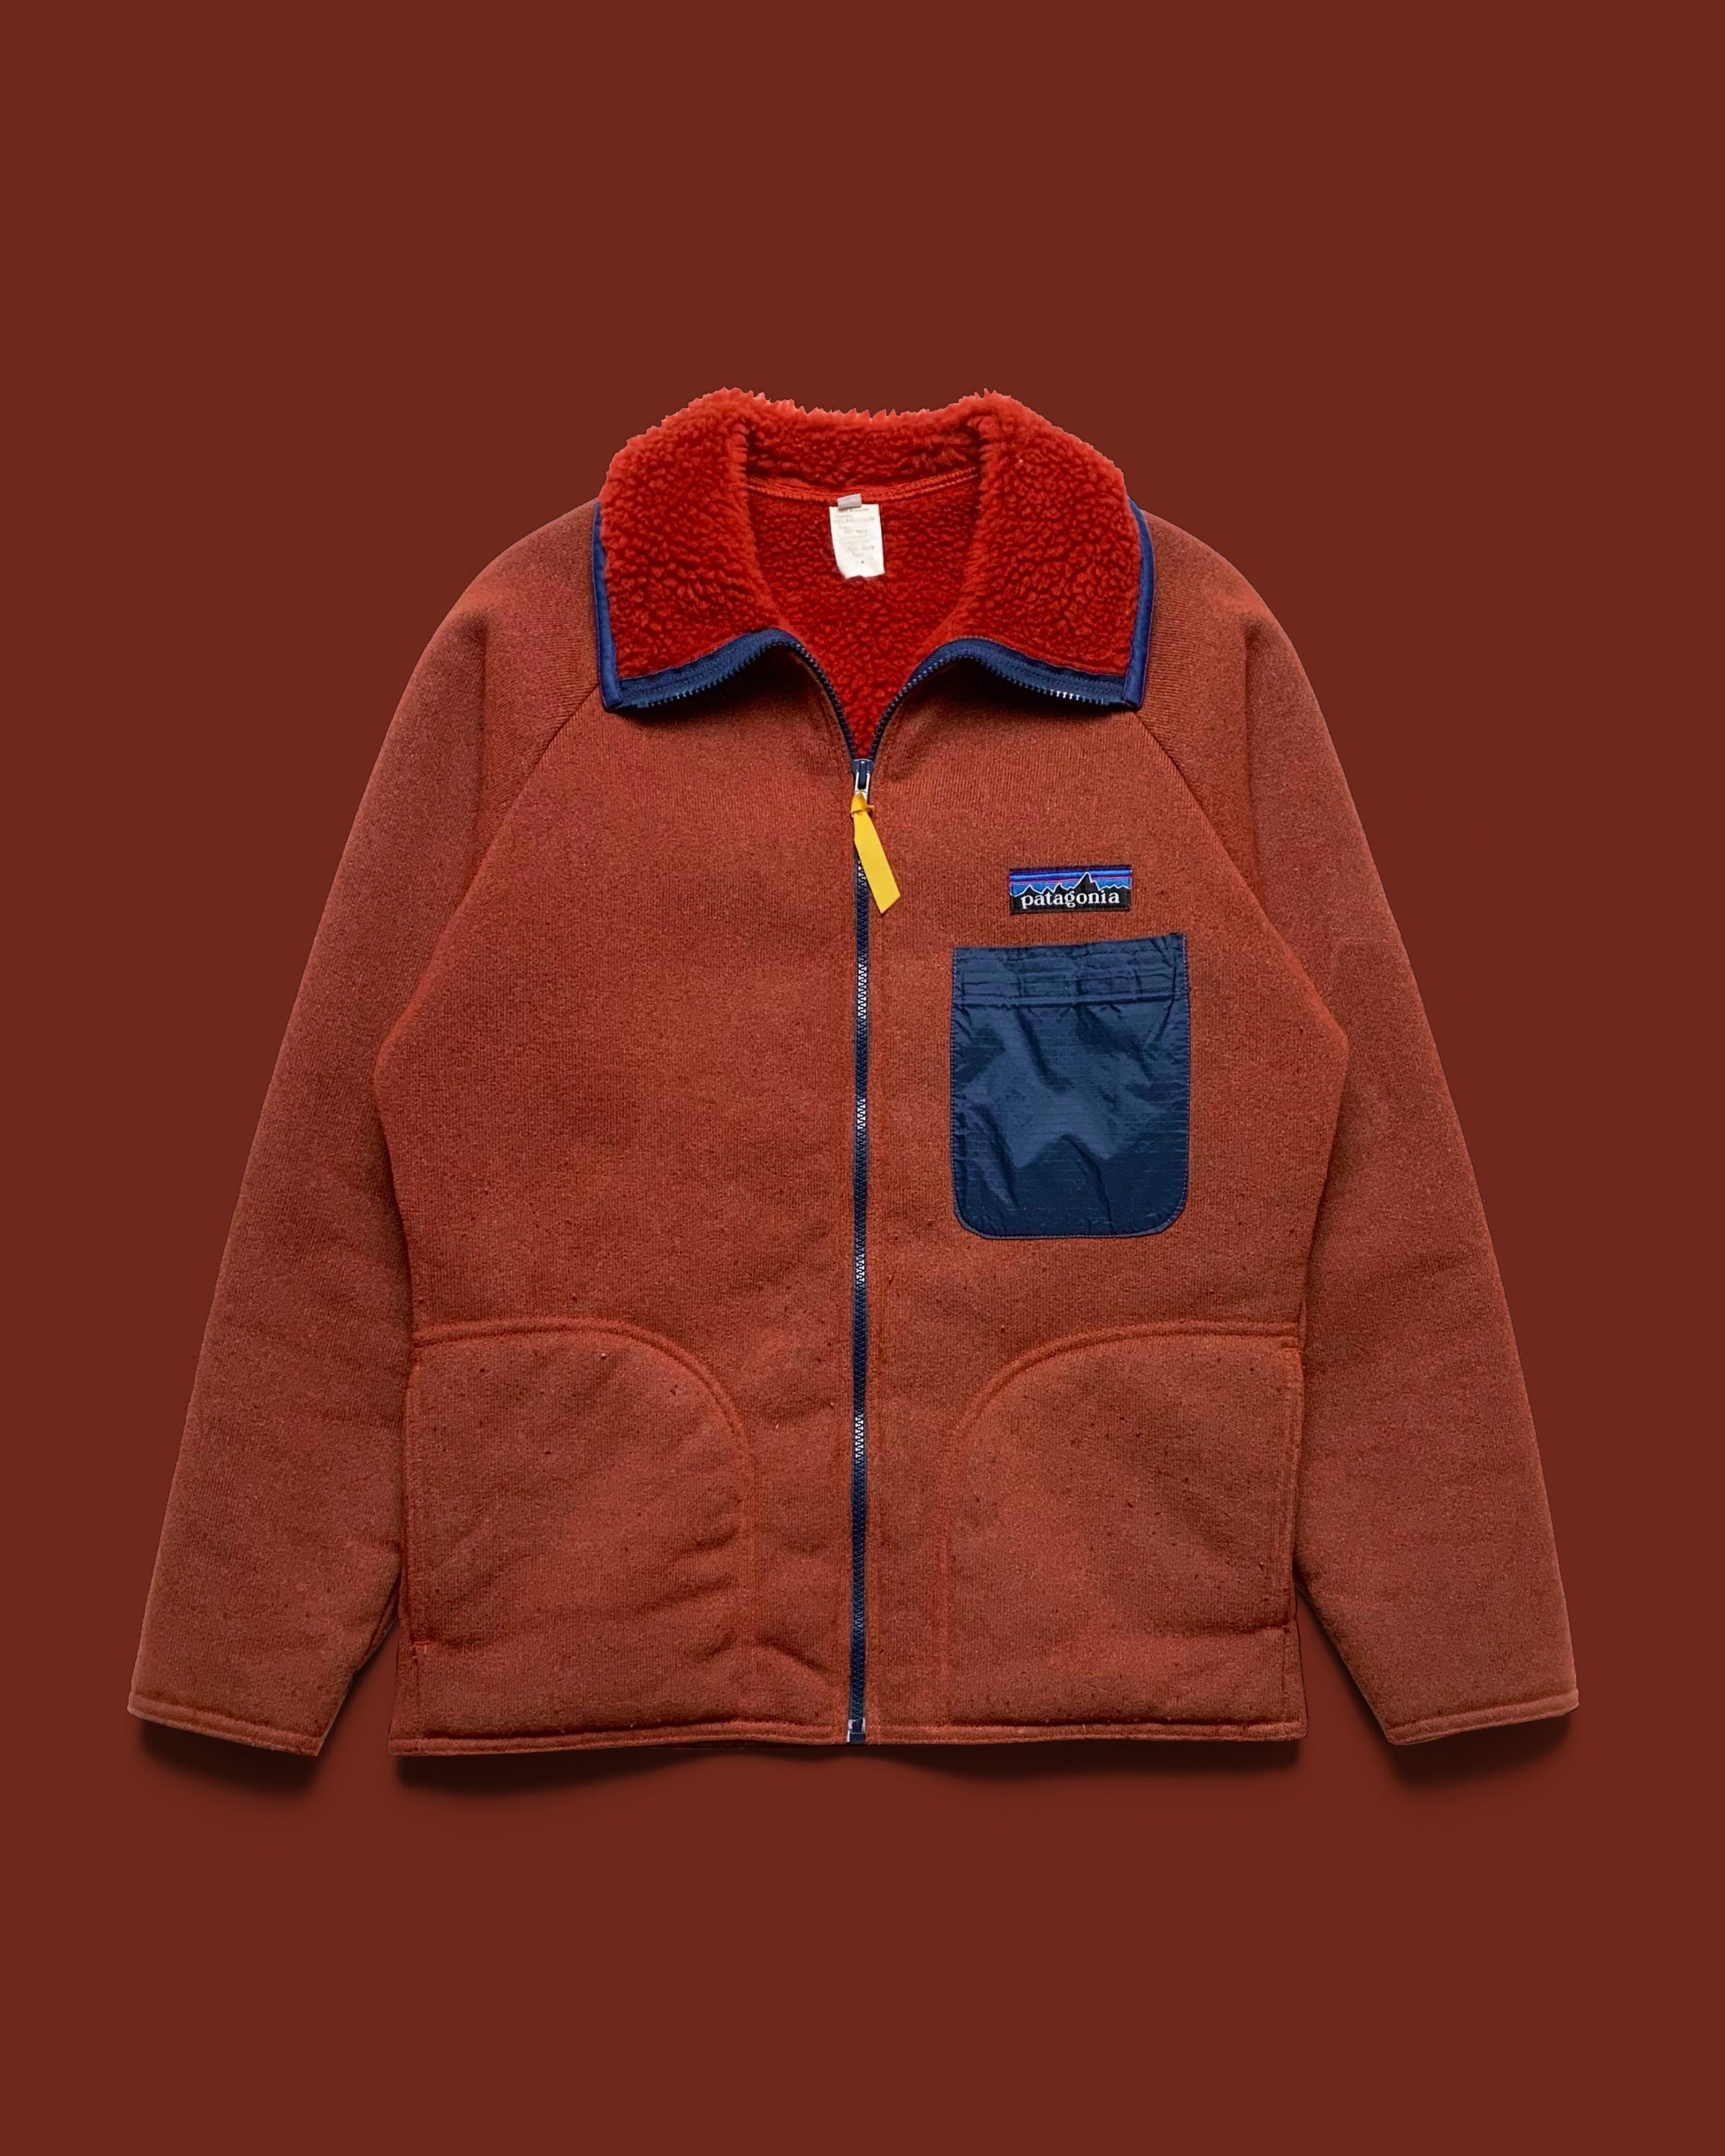 Old School Patagonia & More